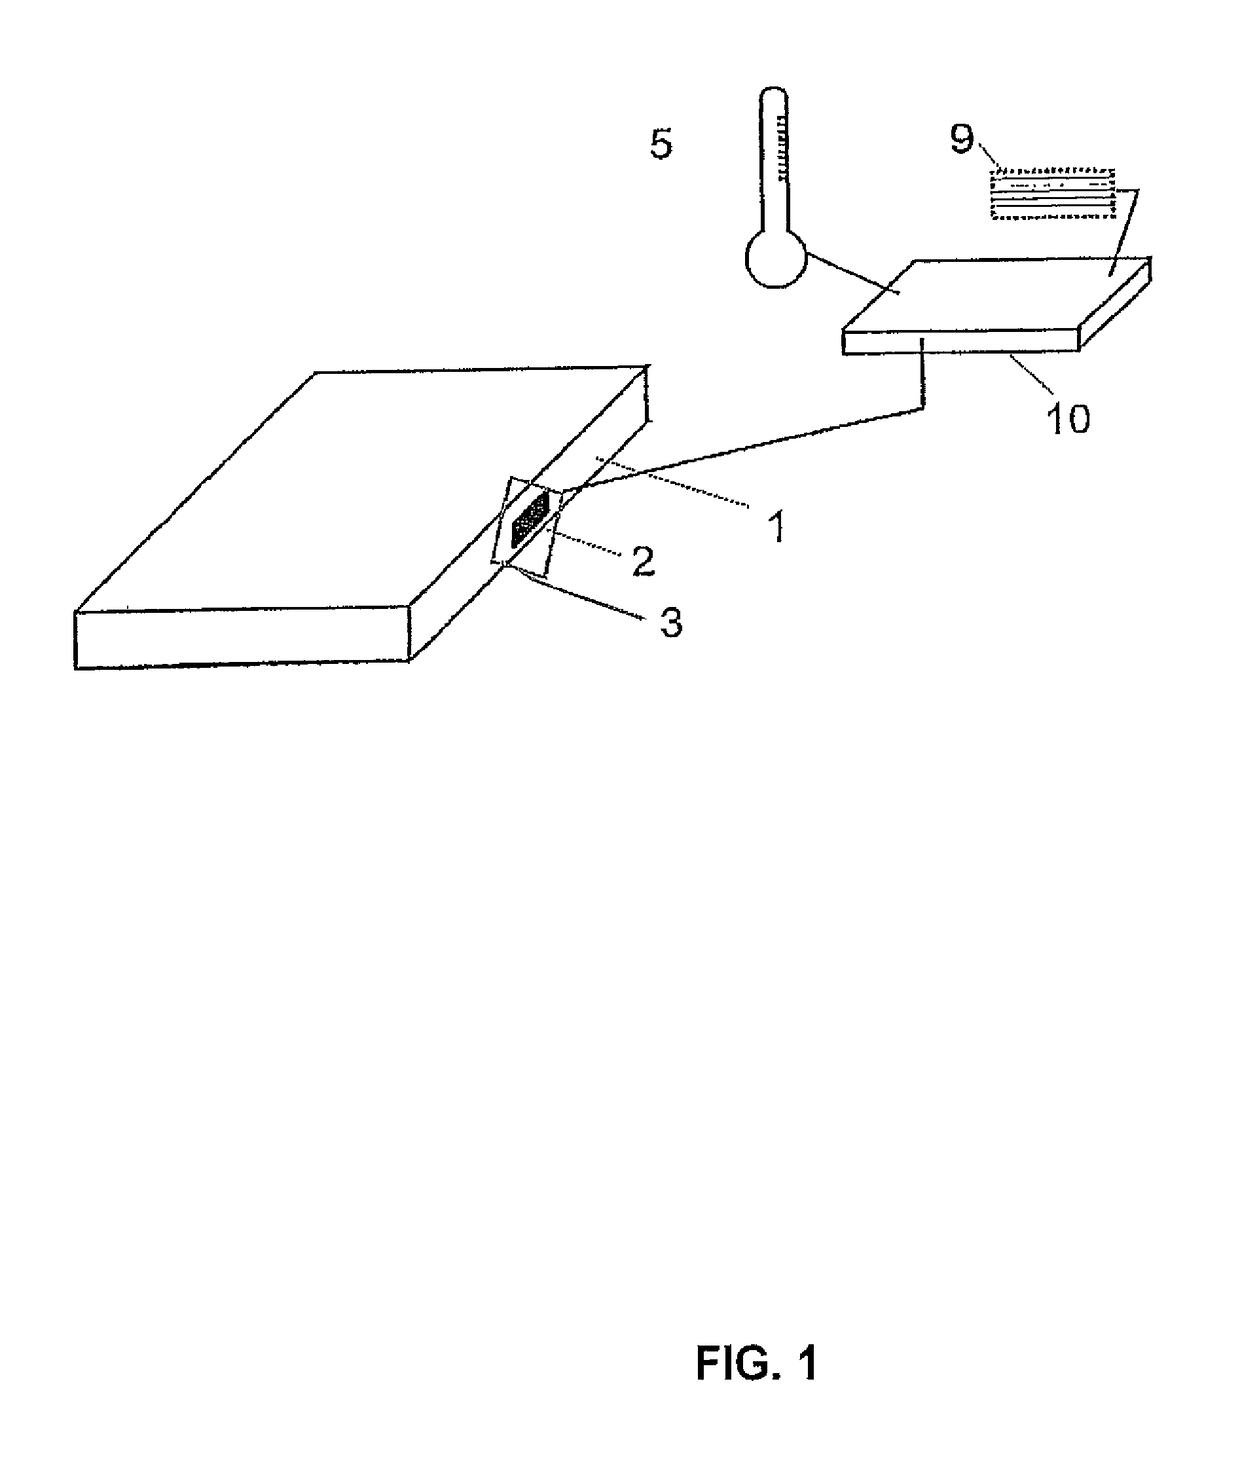 System and method for monitoring manufactured pre-prepared meals